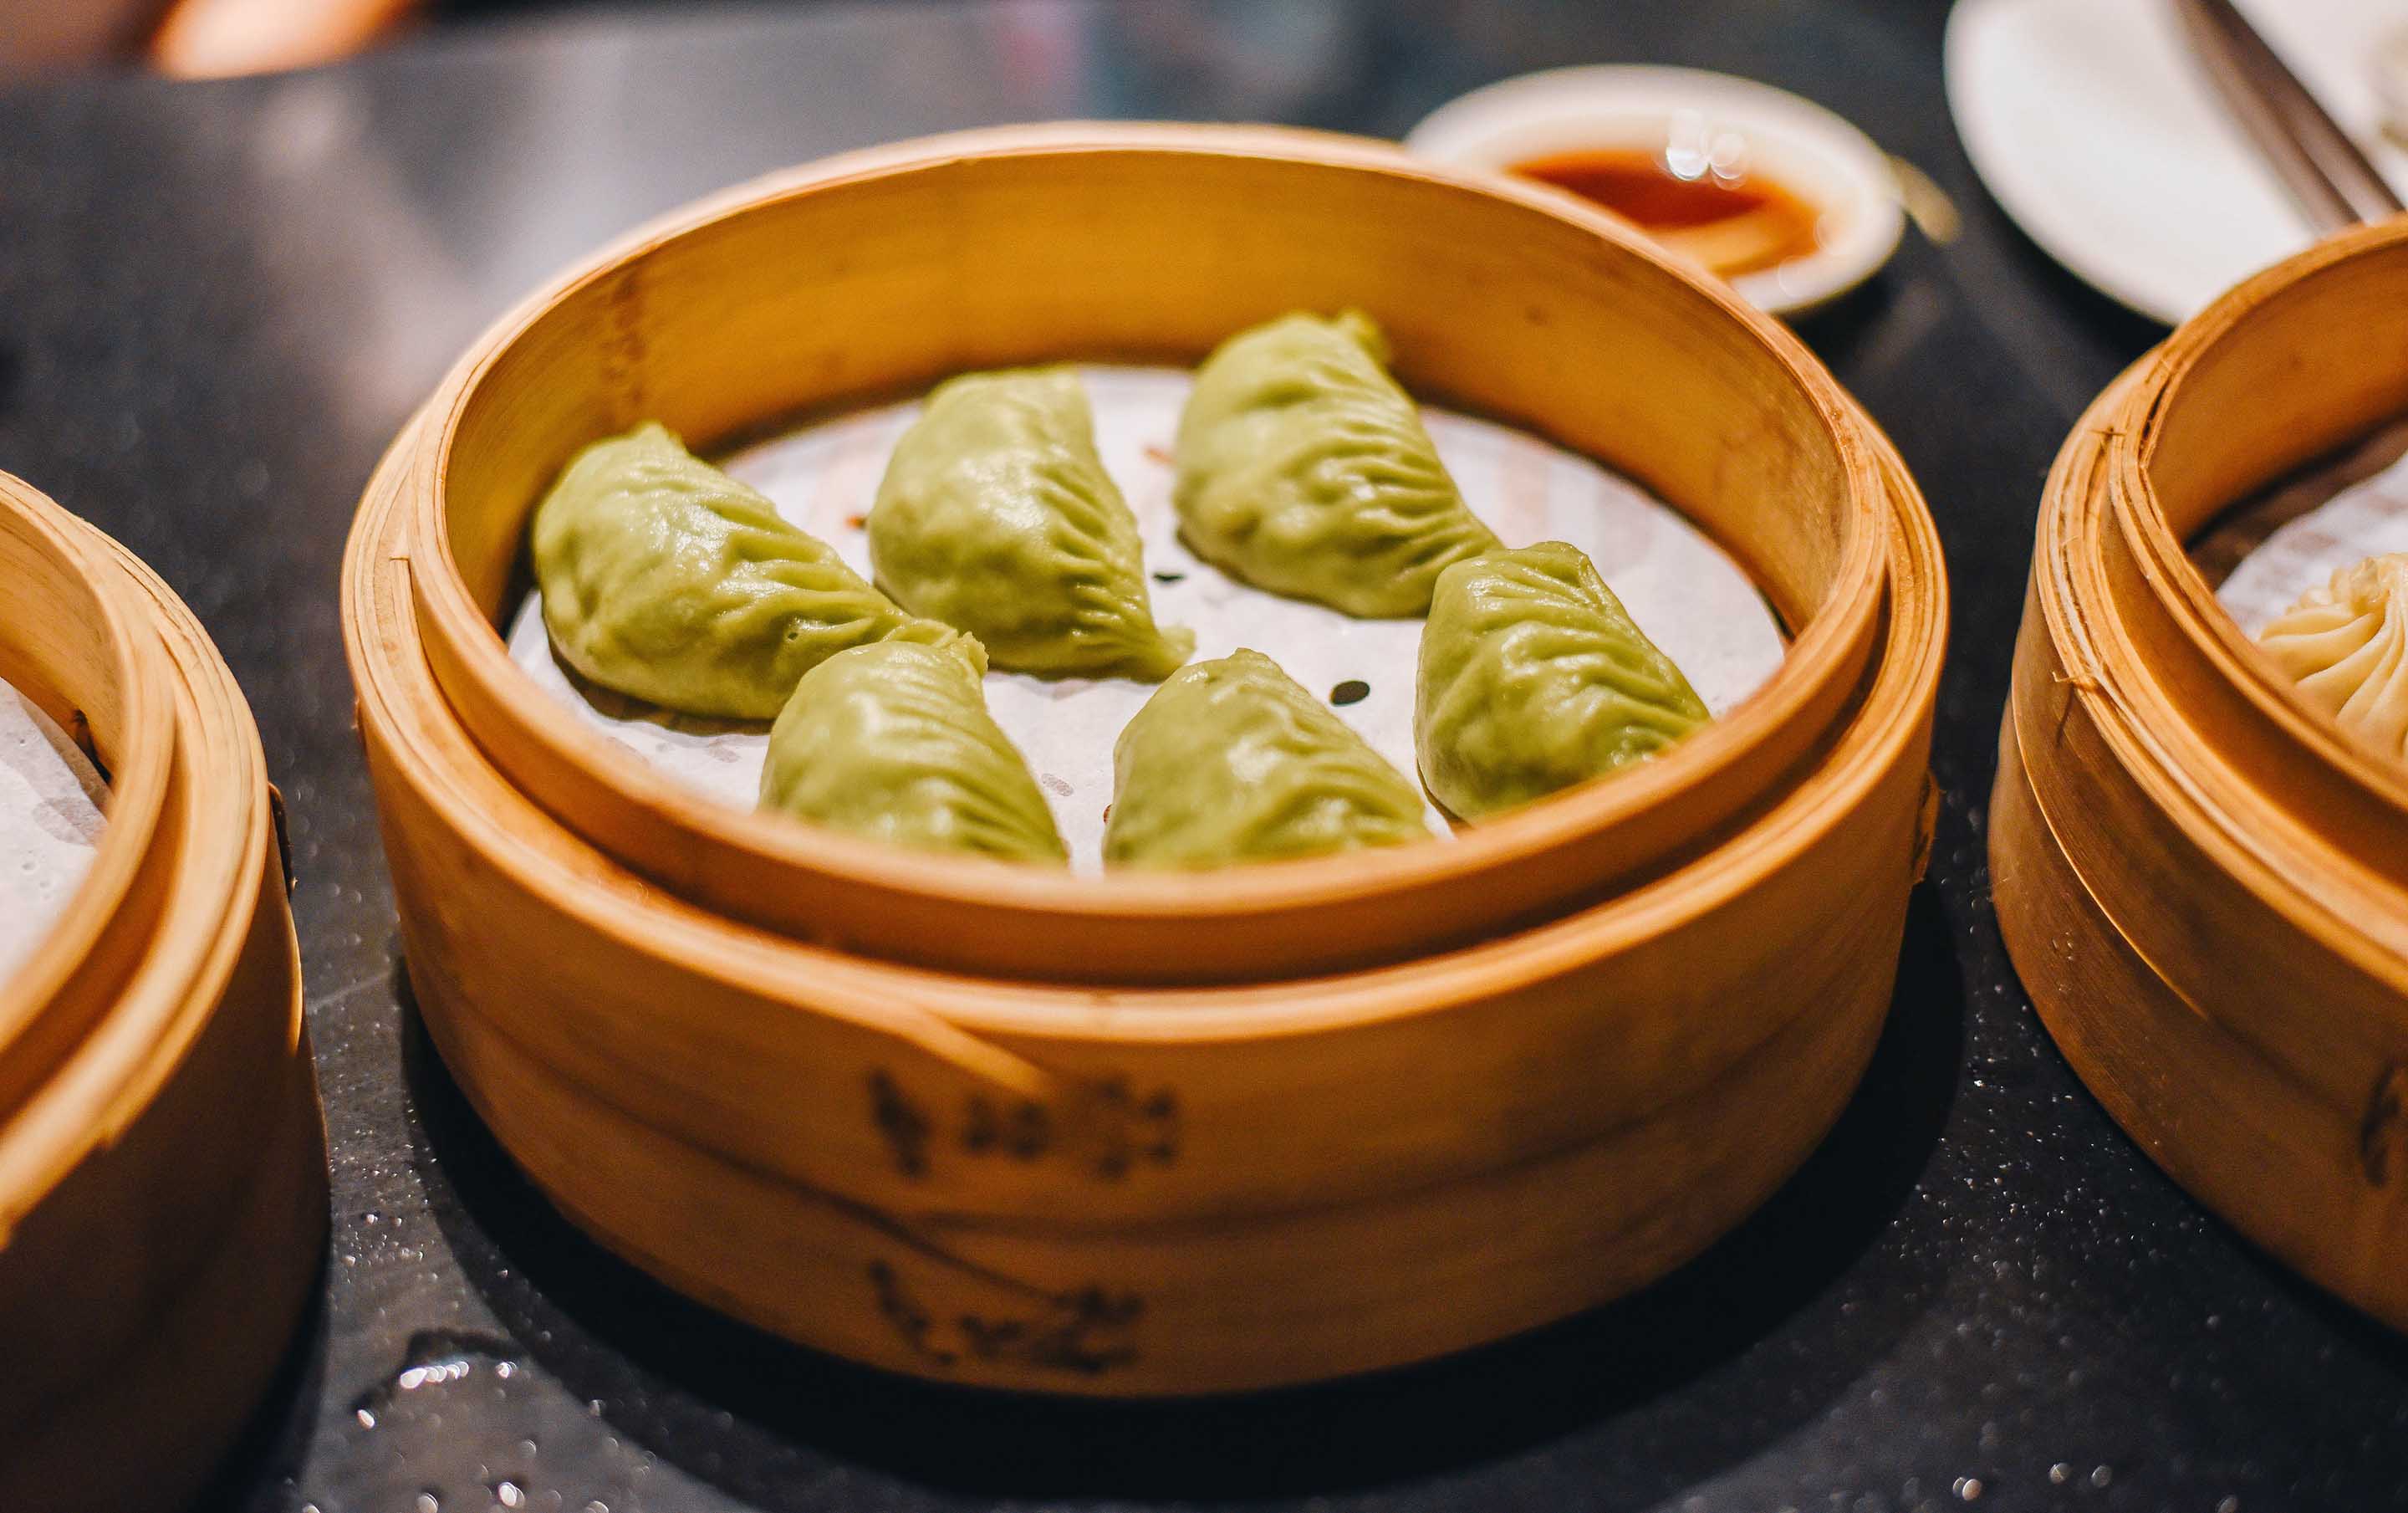 A Taste of Taiwan: Din Tai Fung is delicate, colorful and intense